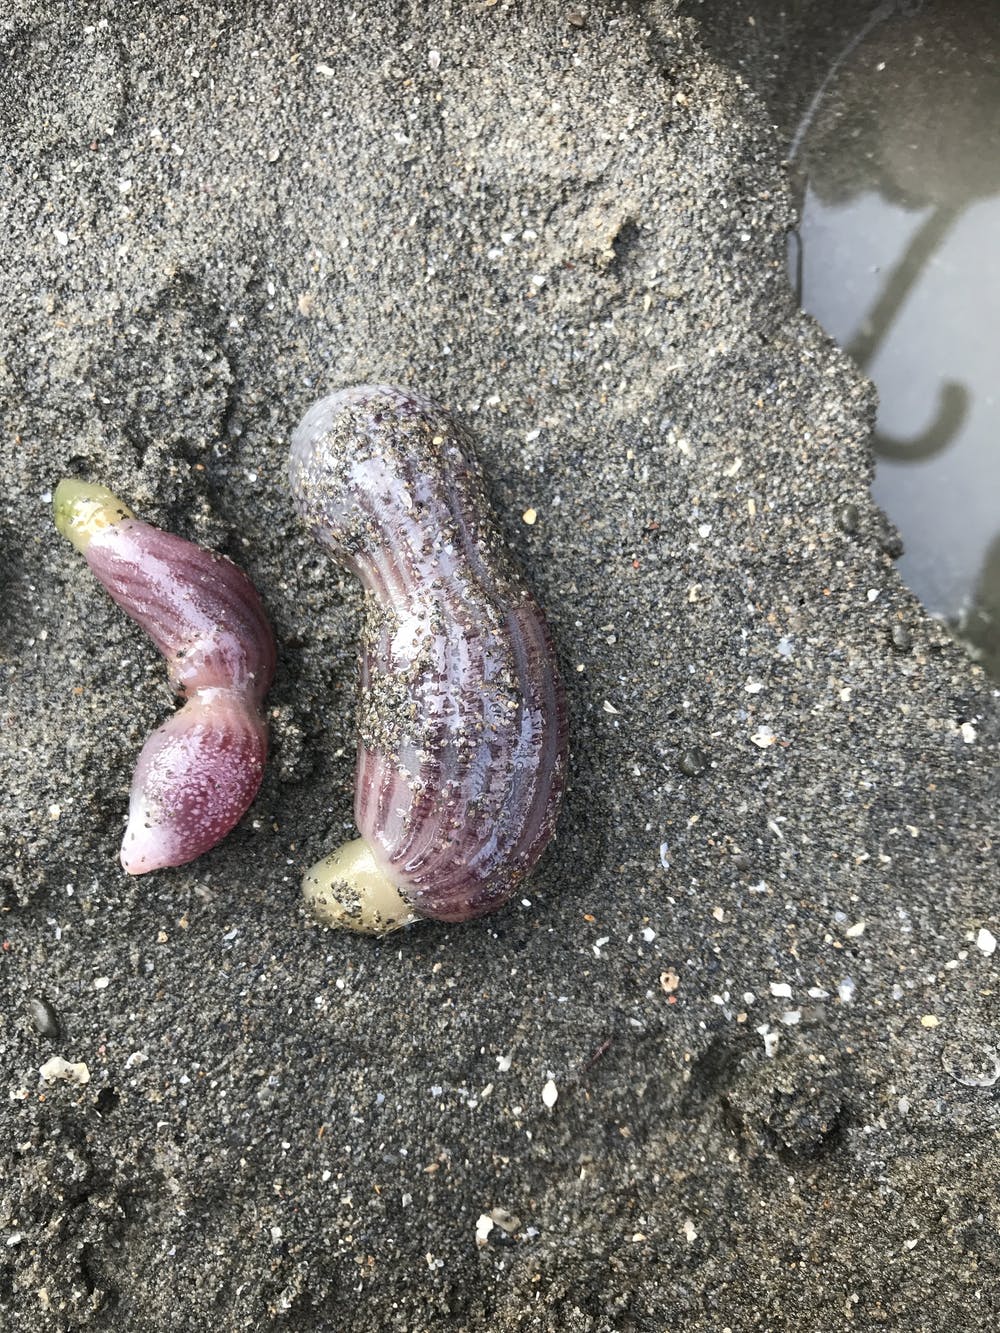 There are an estimated 236 species of penis worm. (Rogerl Josh/iNaturalist/CC BY-NC)